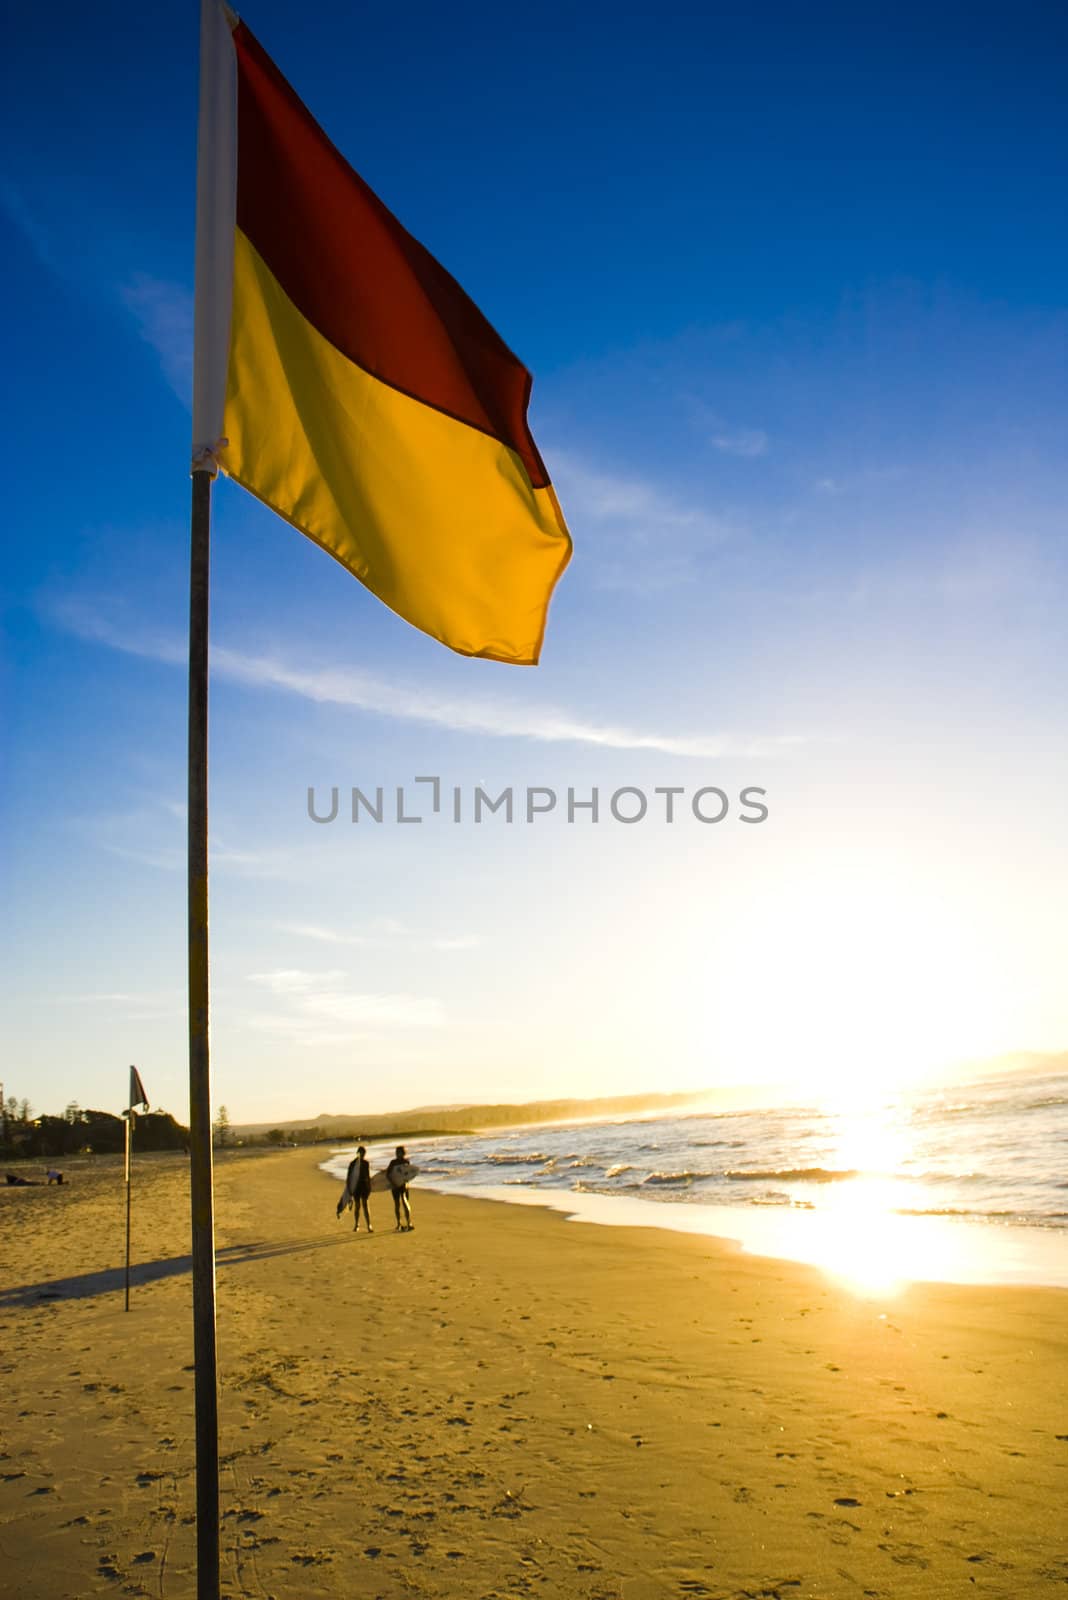 A surf life saving flag in Australia to mark the safe place to swim at the beach just before sunset